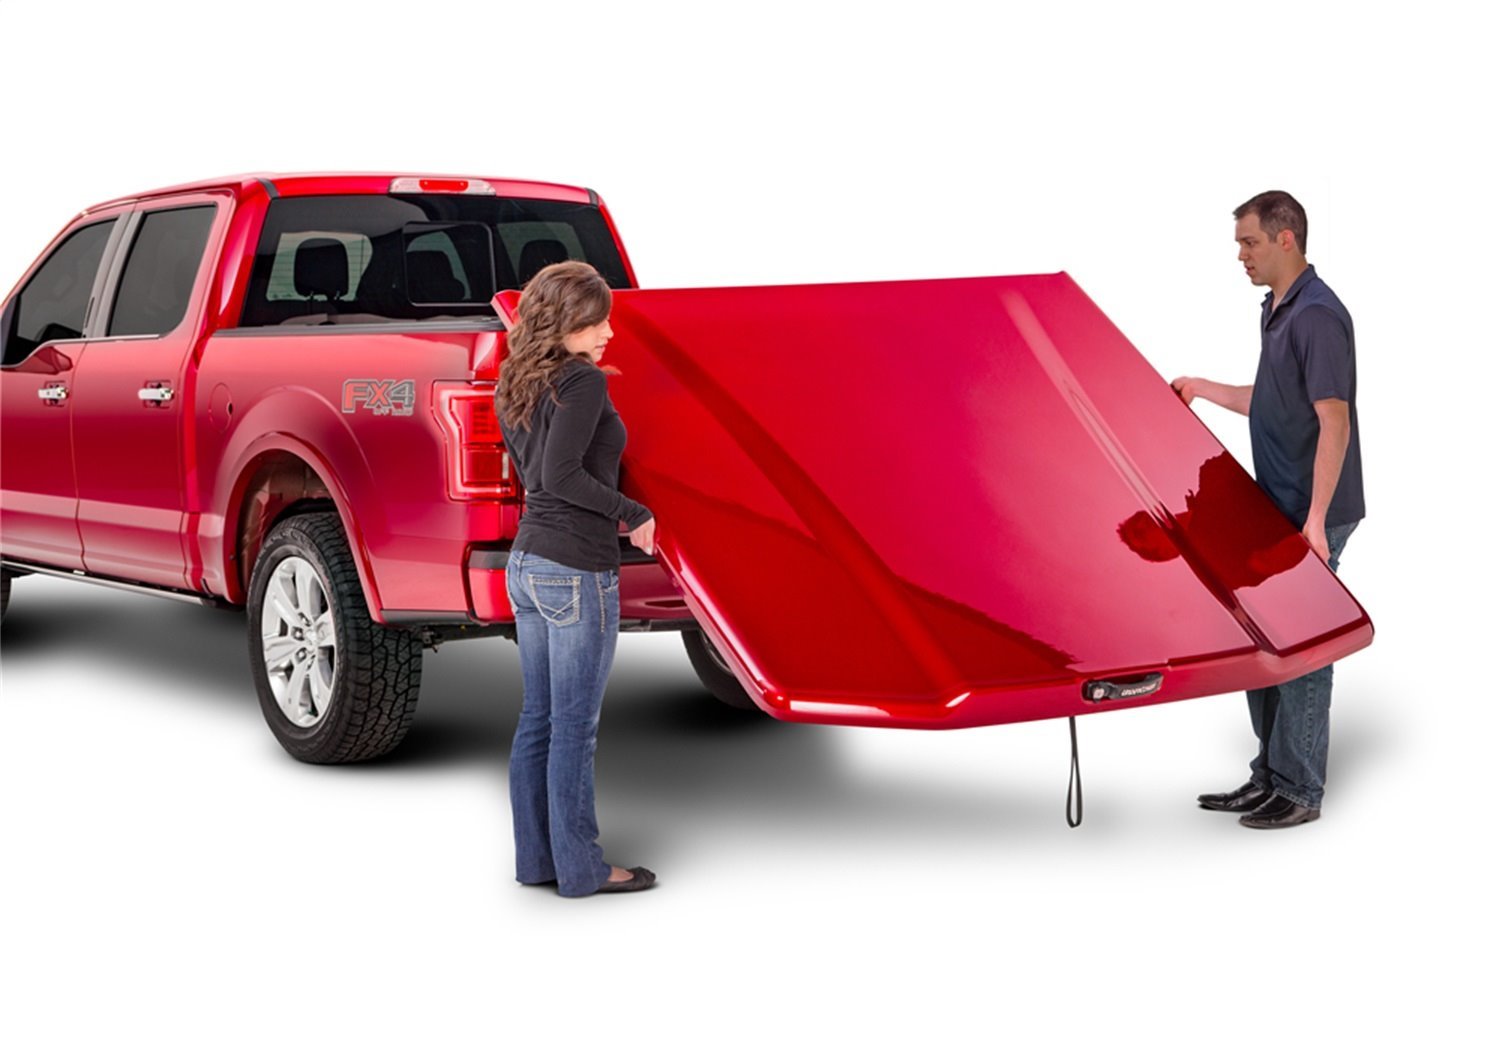 UC4138L-1H5 Elite LX Hard Non-Folding Cover, Fits Select Toyota Tacoma 5'Bed Crew w/ Deck Rail System, 1H5 Cement Gray